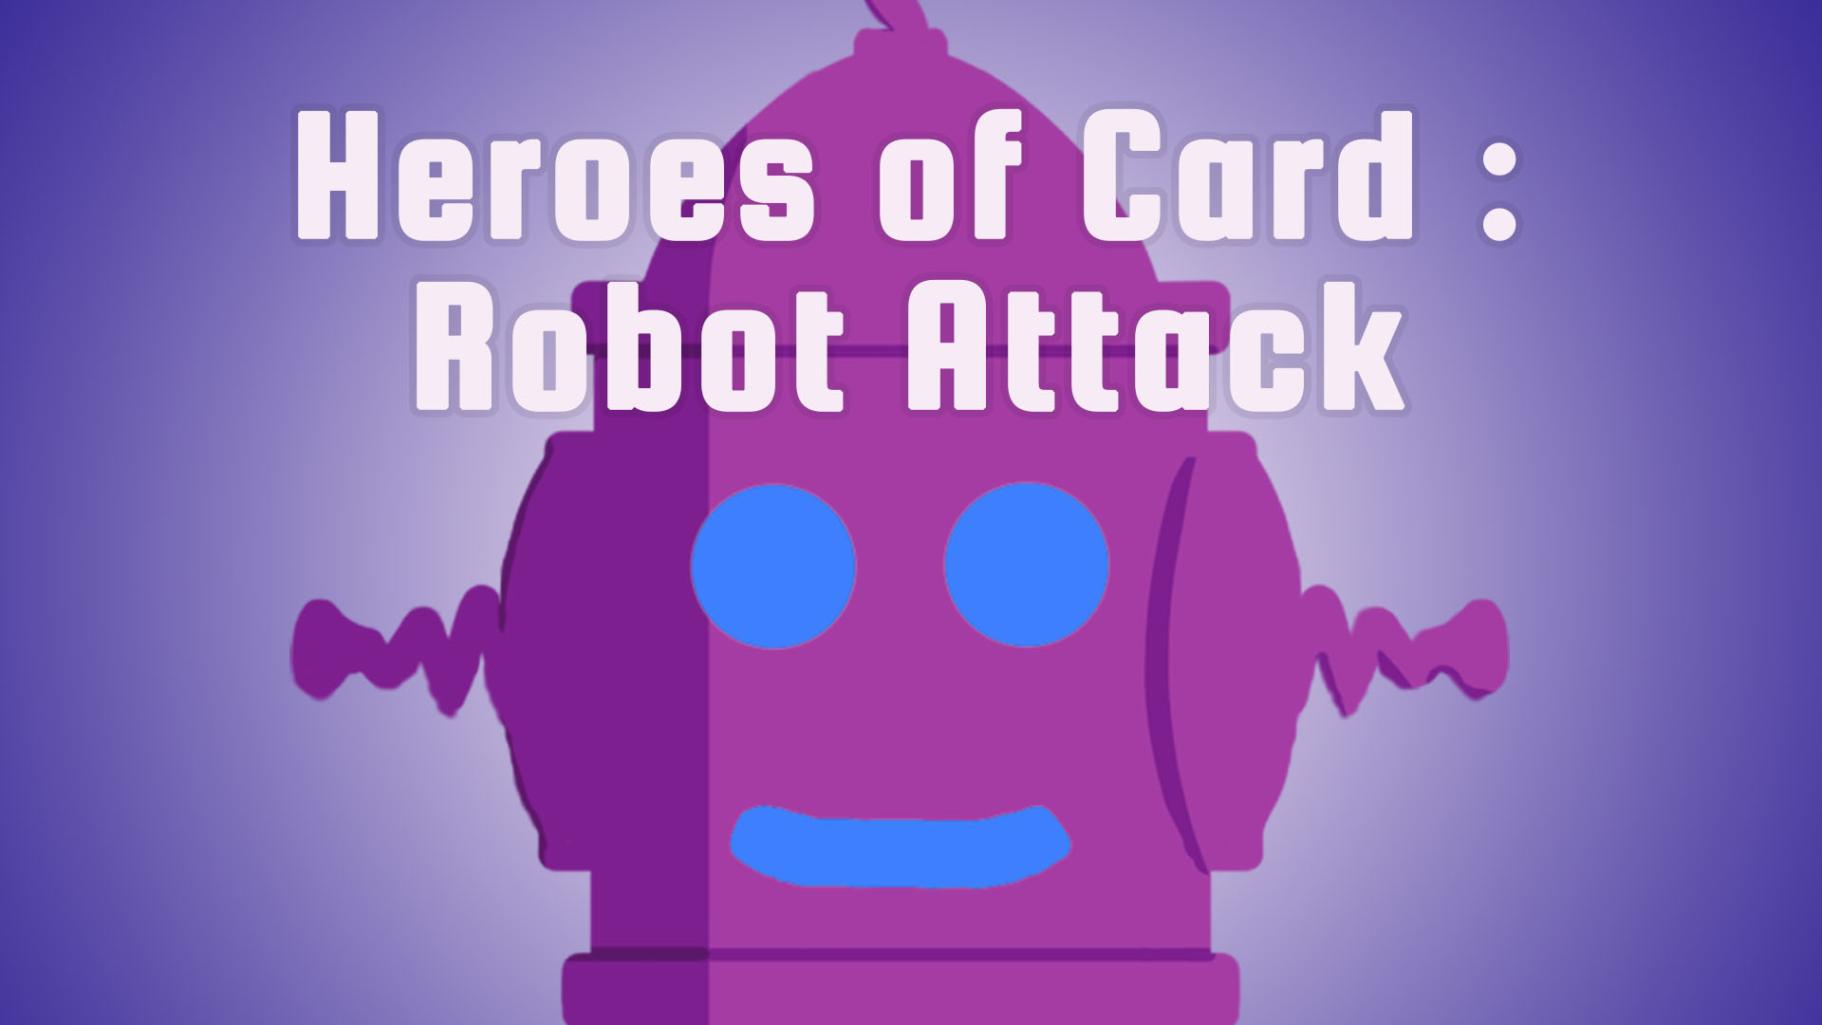 Heroes of Card : Robot Attack